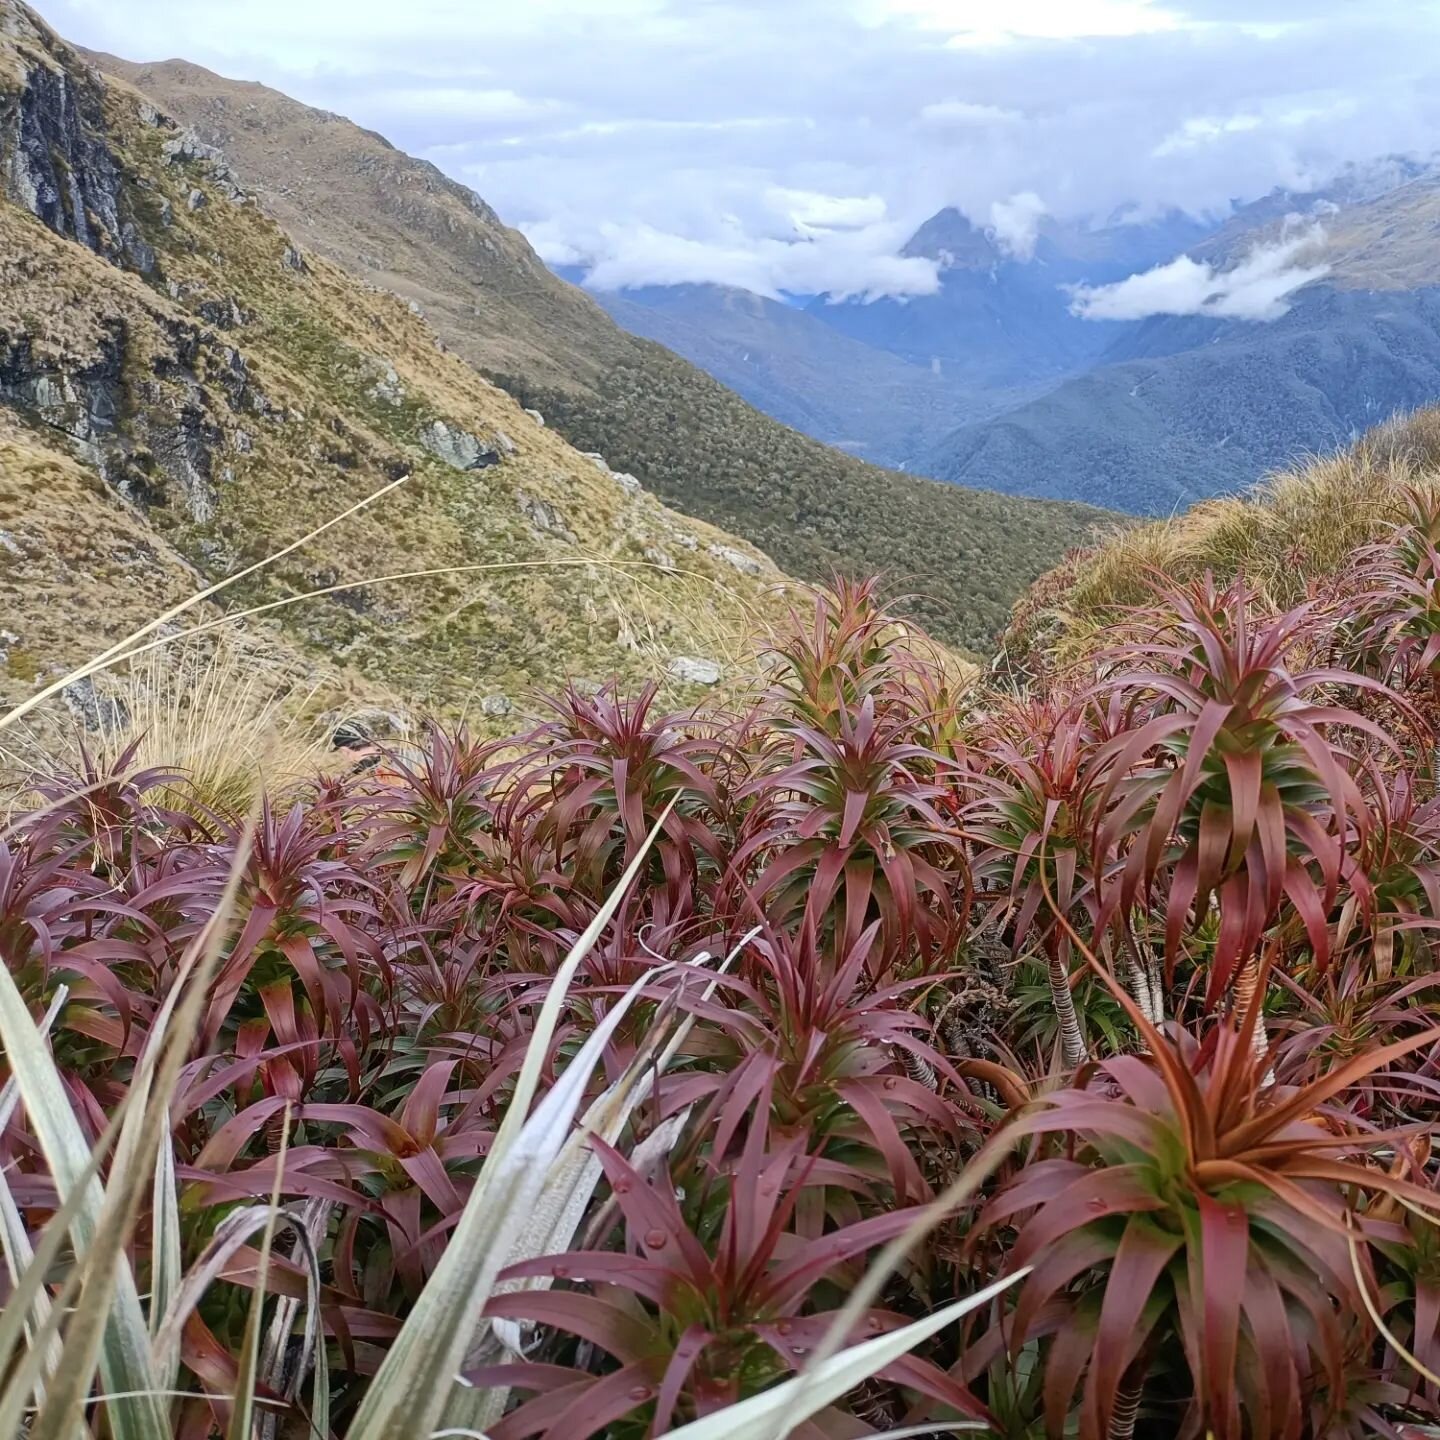 The best landscaping I'll ever see. I kept being stopped by vistas like this stunning deep red Dracophyllum with silver Astelia and swathes of beautiful Chionochloa flavesens (I think). So inspiring.

#routeburntrack #trampingmakesmehappy